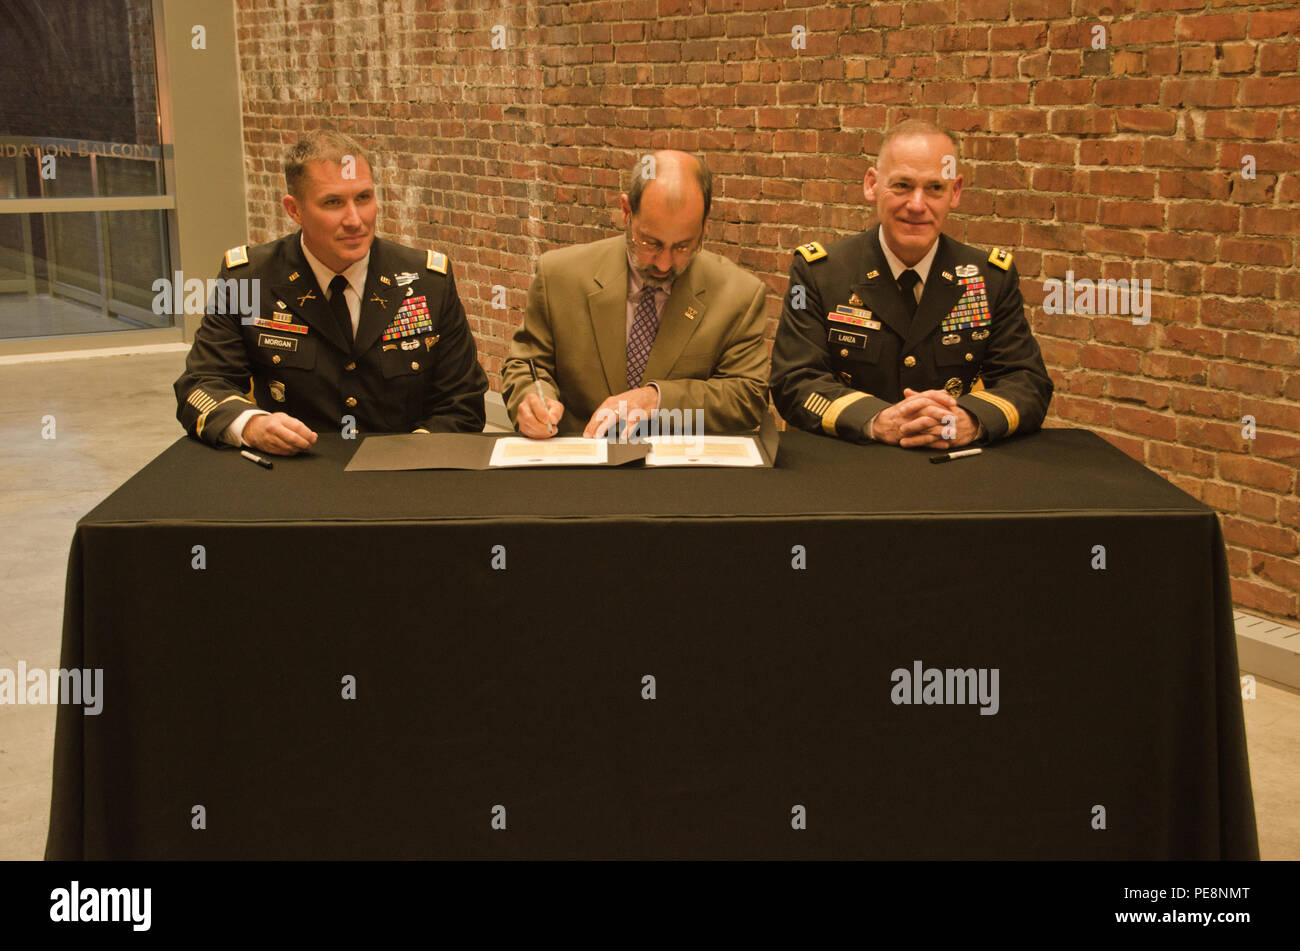 Col. Daniel S. Morgan, commander, Joint Base Lewis-McChord, left, Mark A. Pagano, chancellor, University of Washington-Tacoma, center, and Lt. Gen. Stephen R. Lanza, commanding general, I Corps, JBLM, right, come together to sign partnership resolutions at the UW-T, Oct. 29, 2015. Both JBLM and I Corps signed partnership resolutions with the UW-T agreeing to become a model university and military institutional partnership. (U.S. Army photo by Sgt. Jasmine Higgins, 28th Public Affairs Detachment) Stock Photo